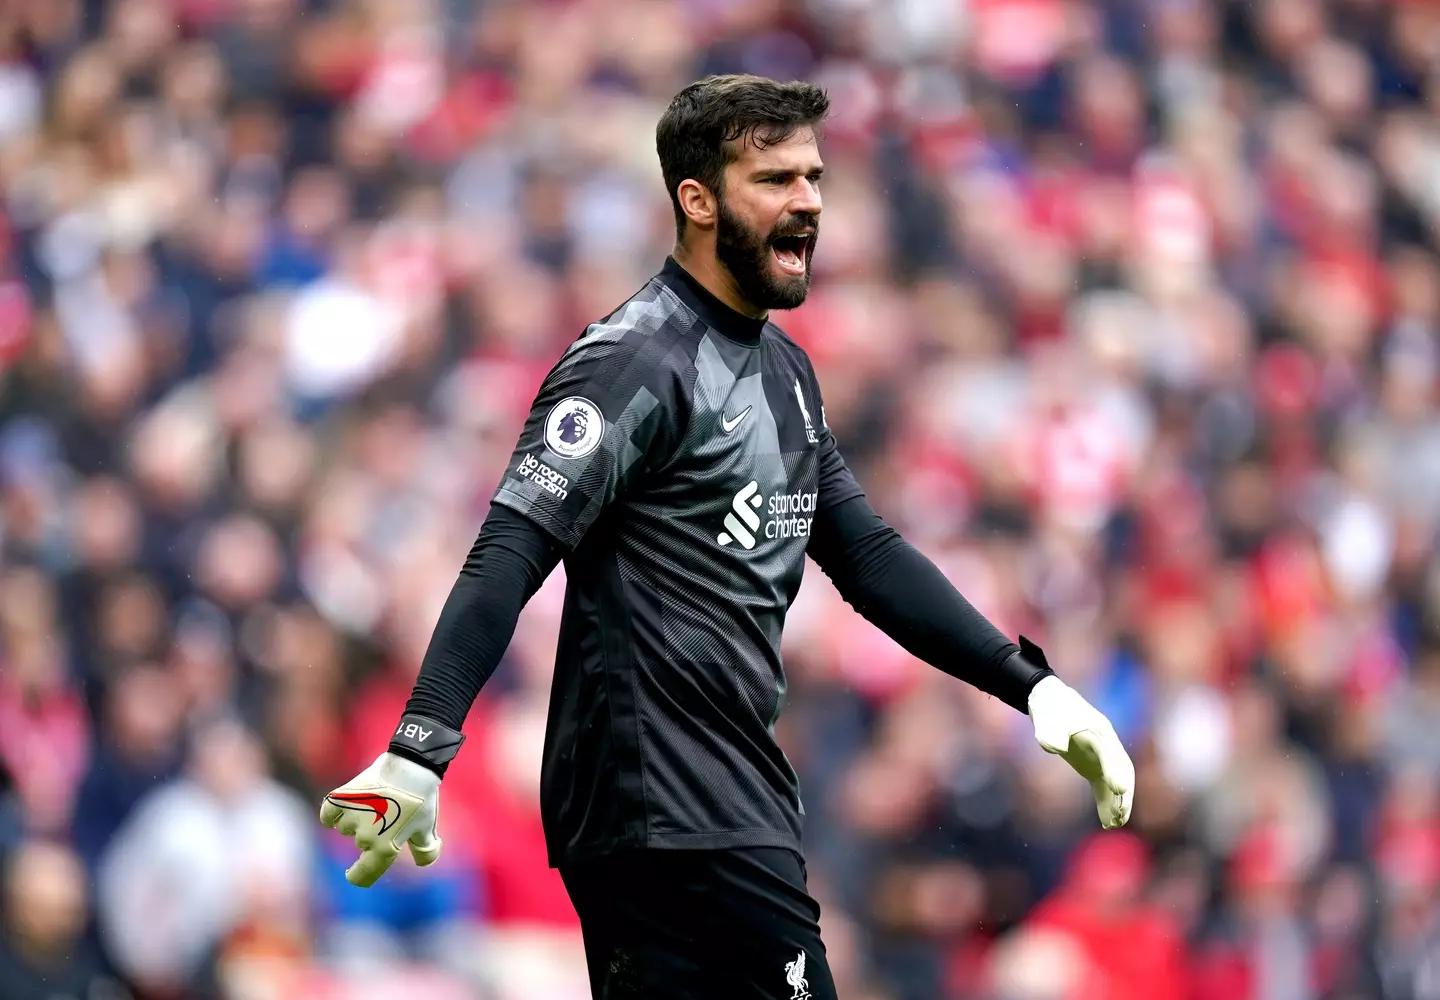 Liverpool will be missing Alisson for their game against Leeds, as well as two other players. Image: PA Images